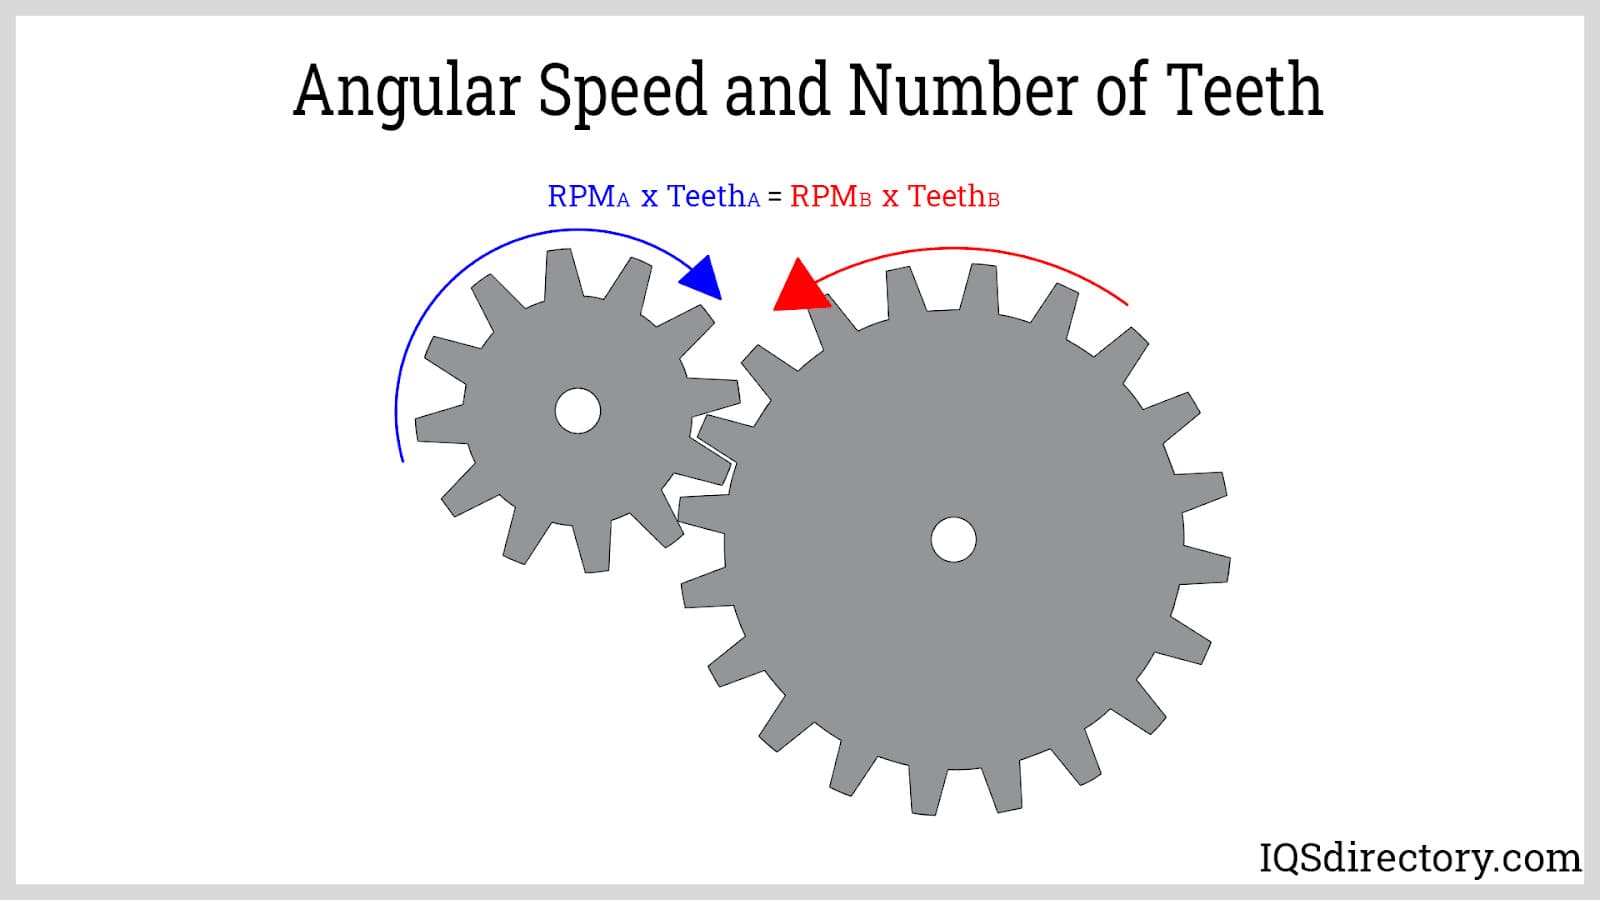 Angular Speed and Number of Teeth